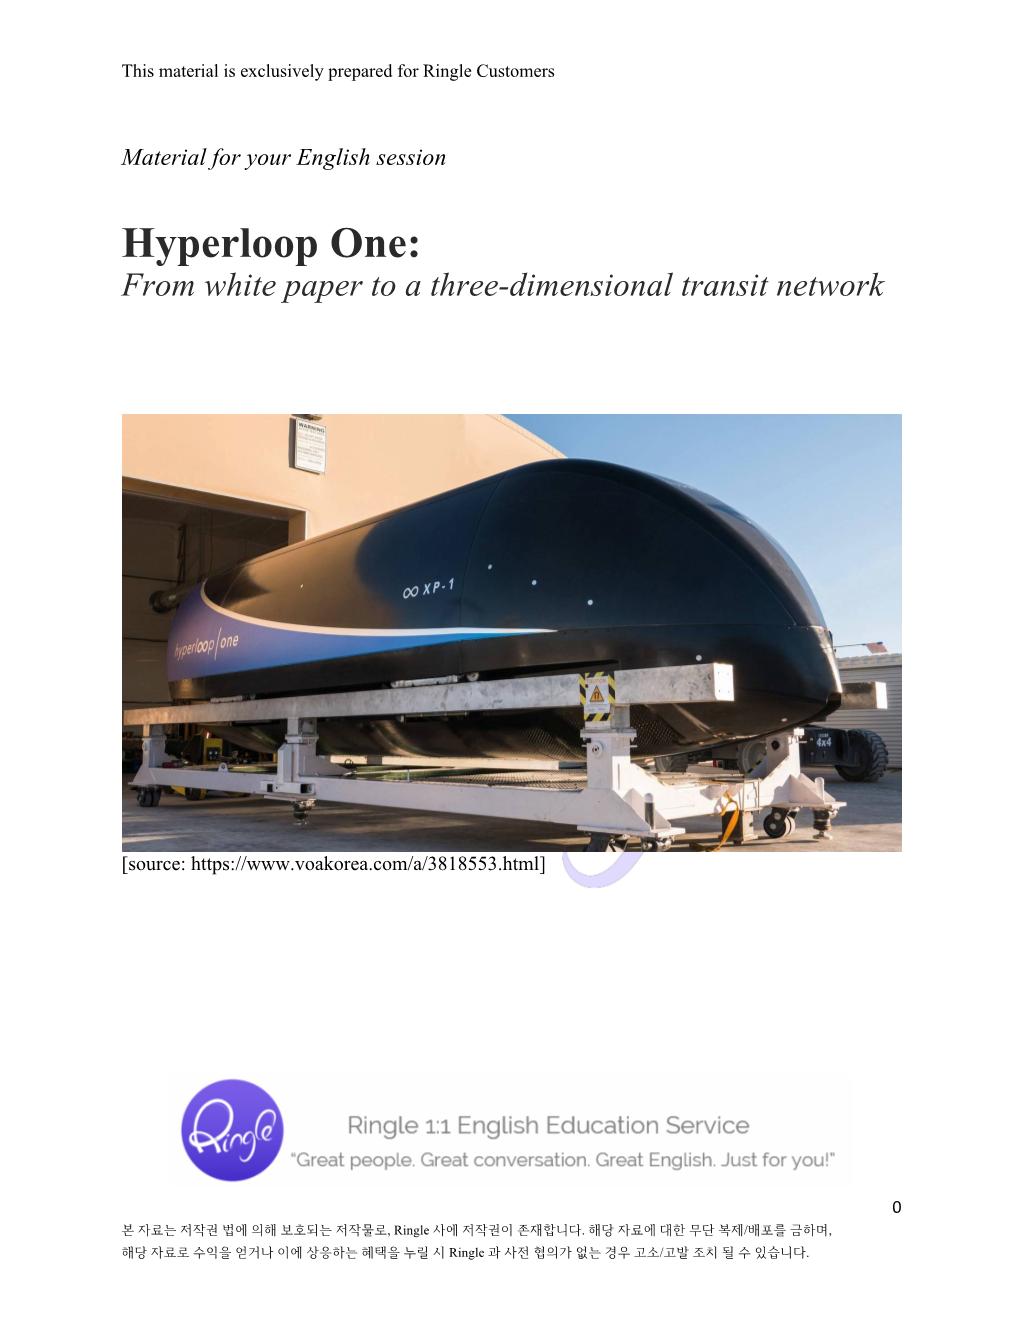 Hyperloop One: from White Paper to a Three-Dimensional Transit Network